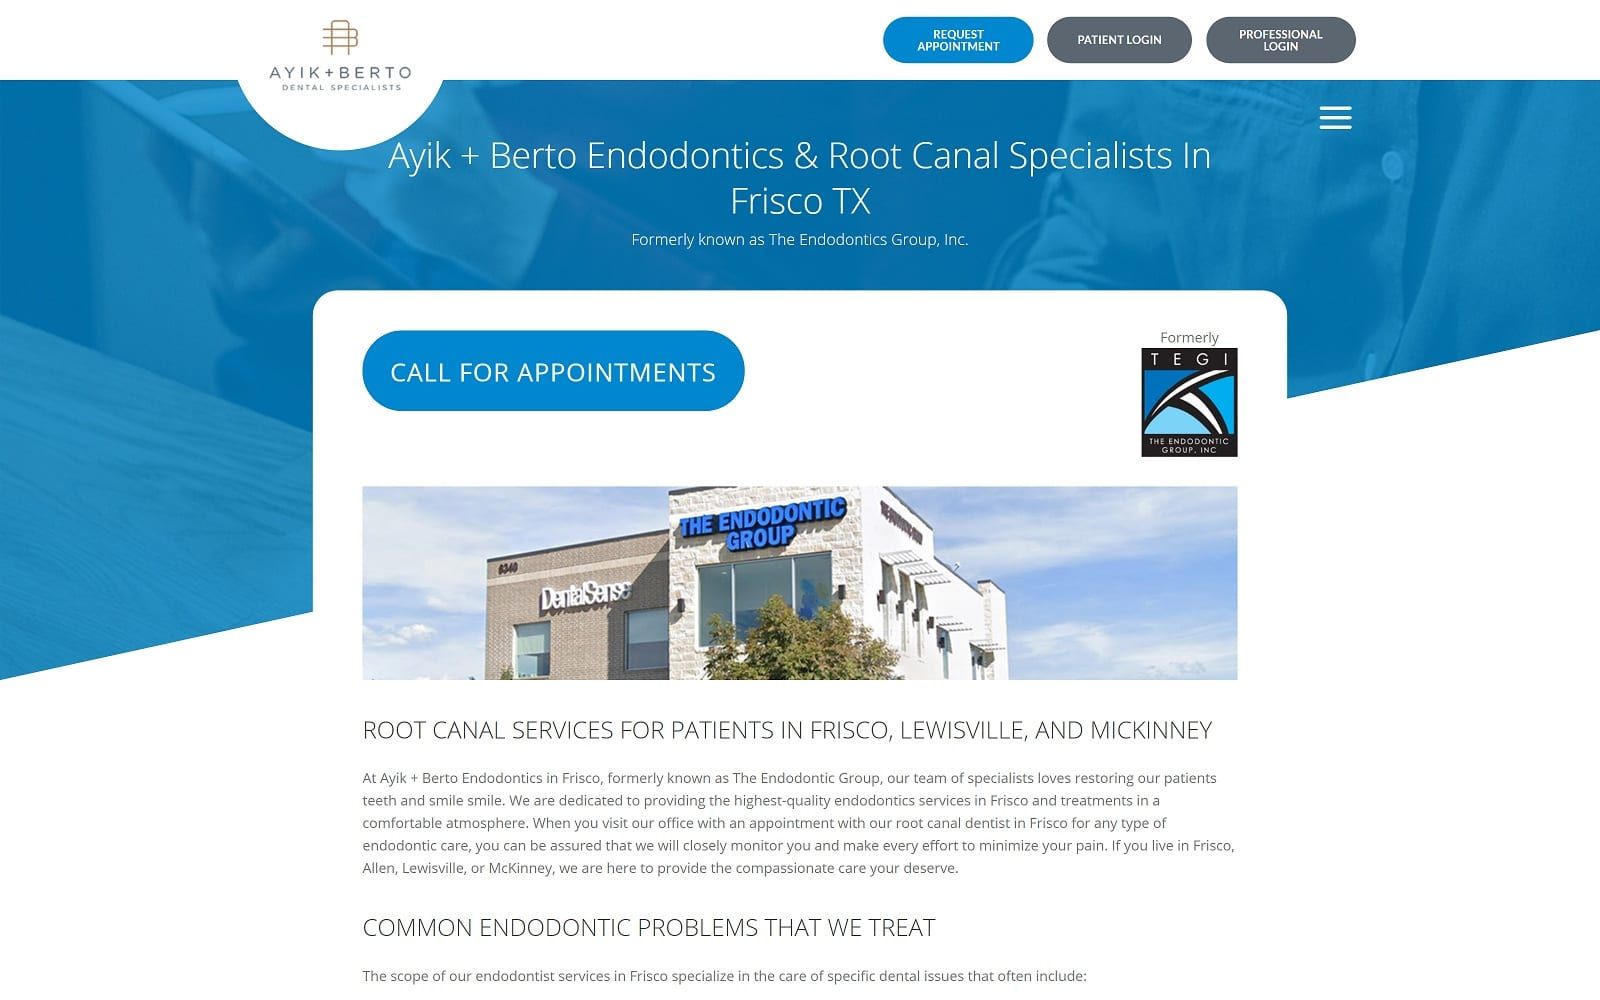 The screenshot of the endodontic group ayikberto. Com/patients/locations/frisco-tx
website